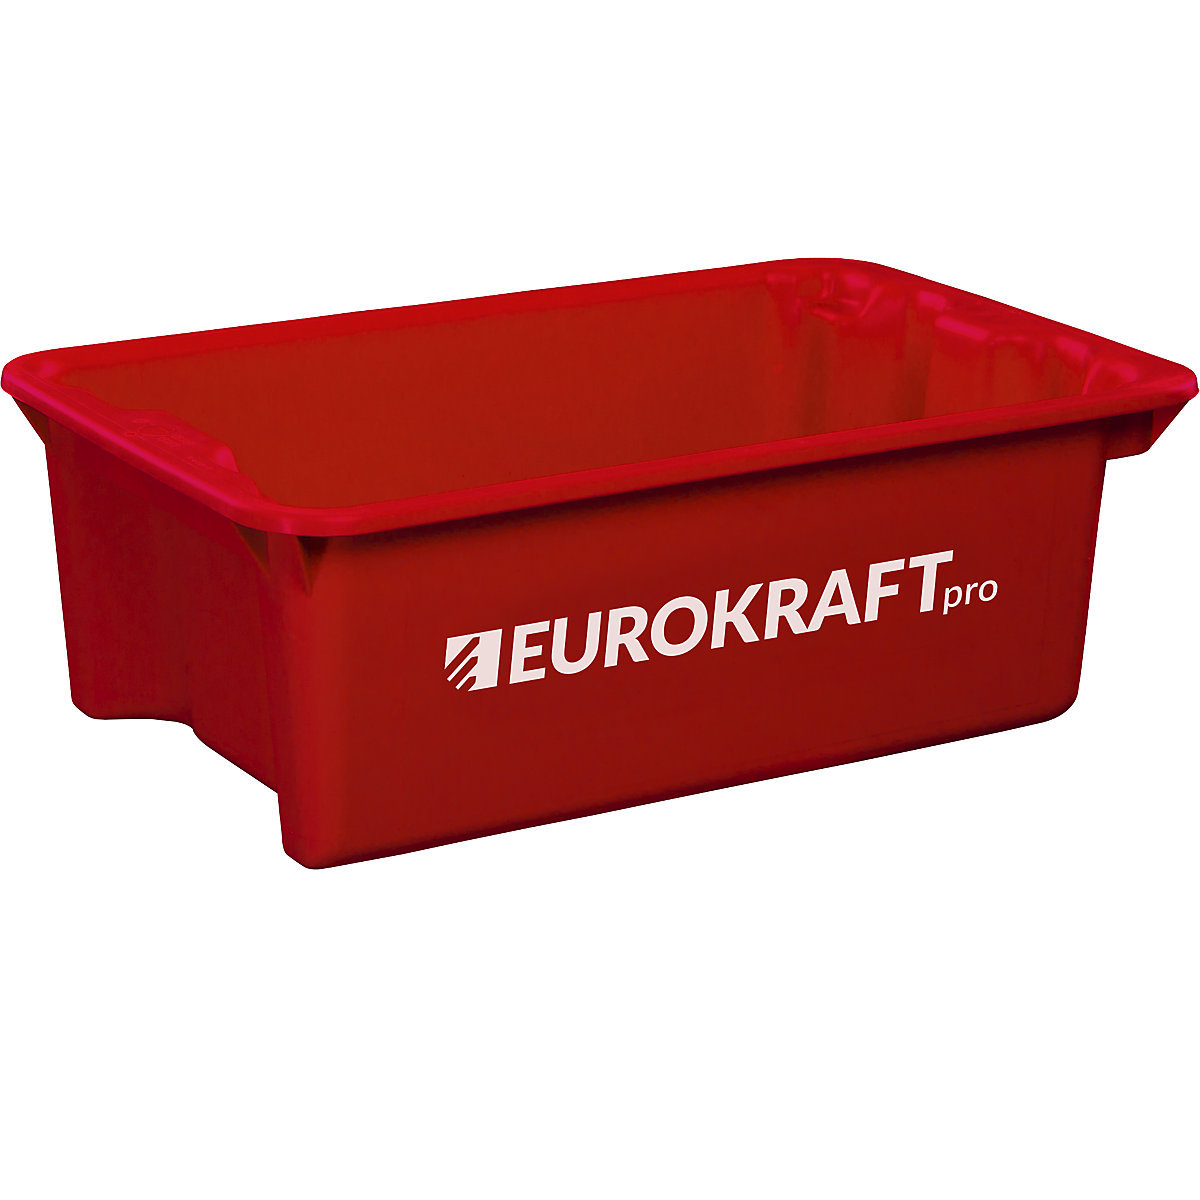 EUROKRAFTpro – Stack/nest container made of polypropylene suitable for foodstuffs, 34 l capacity, pack of 3, solid walls and base, red